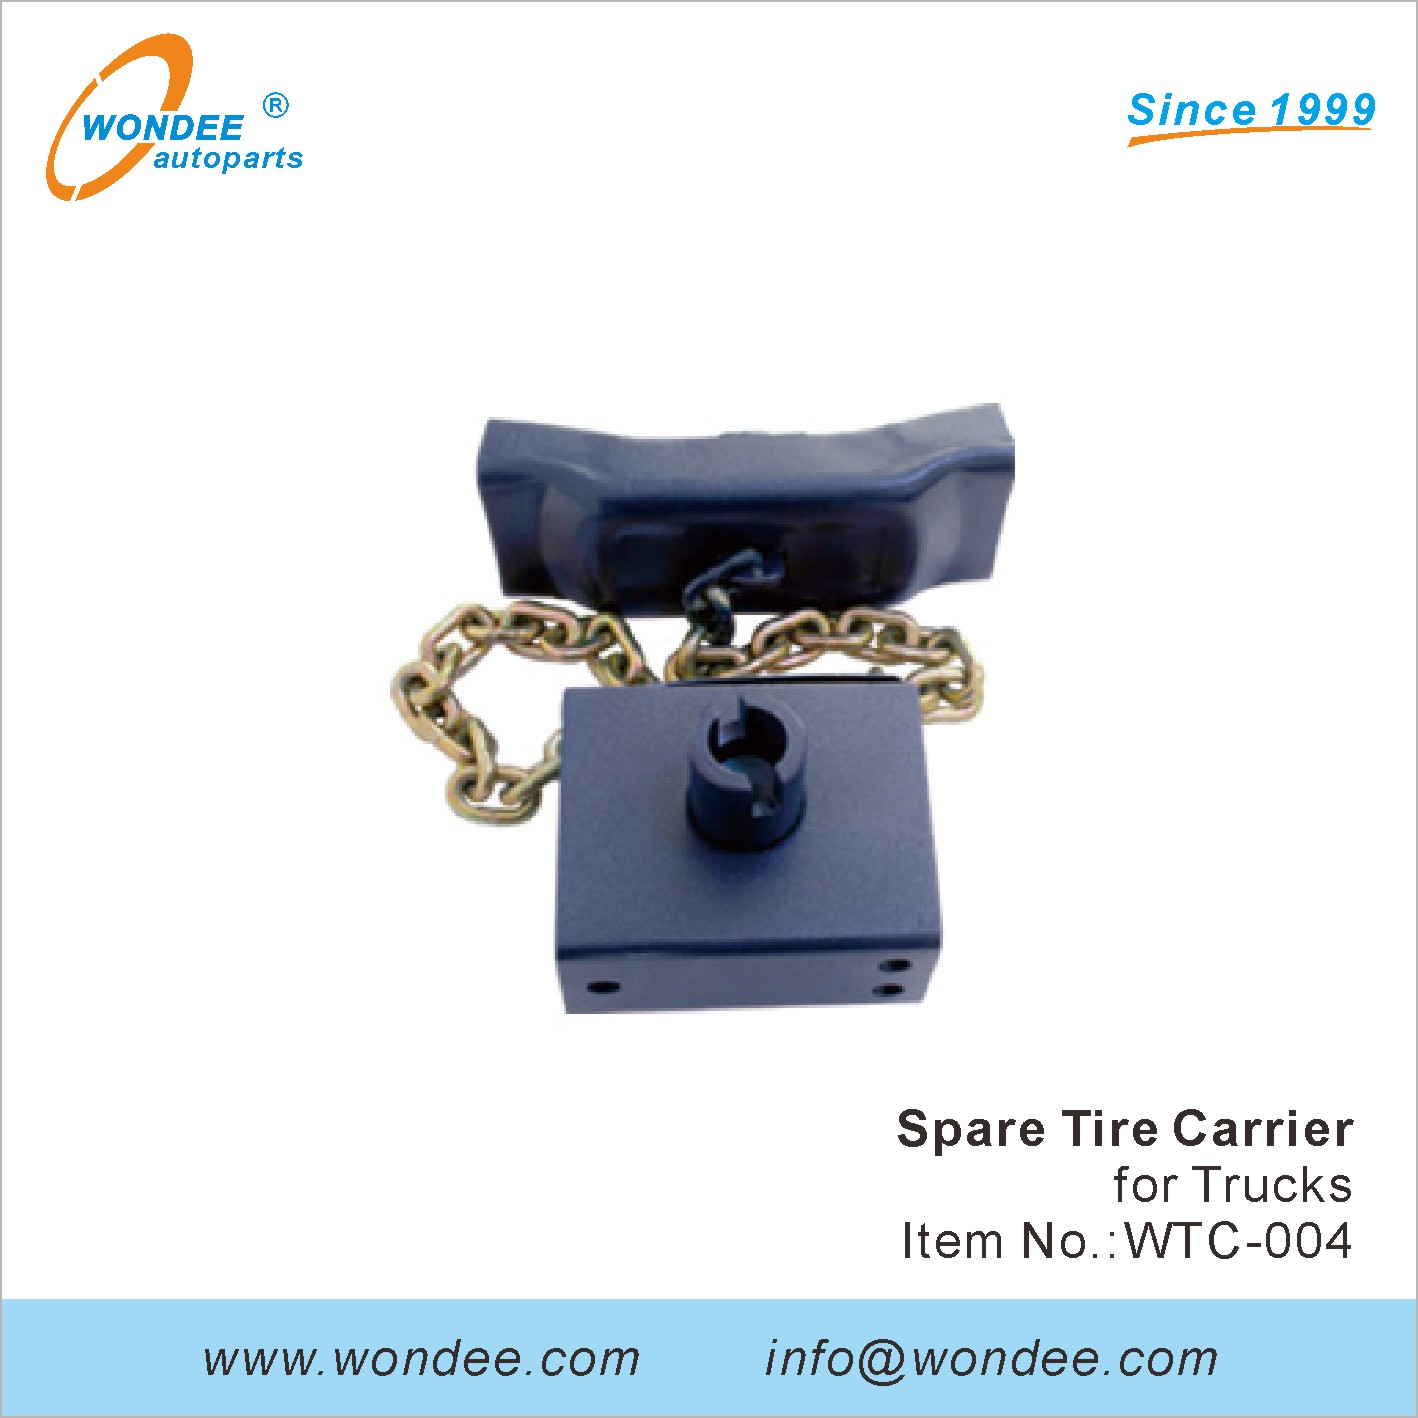 WONDEE spare tire carrier (4)